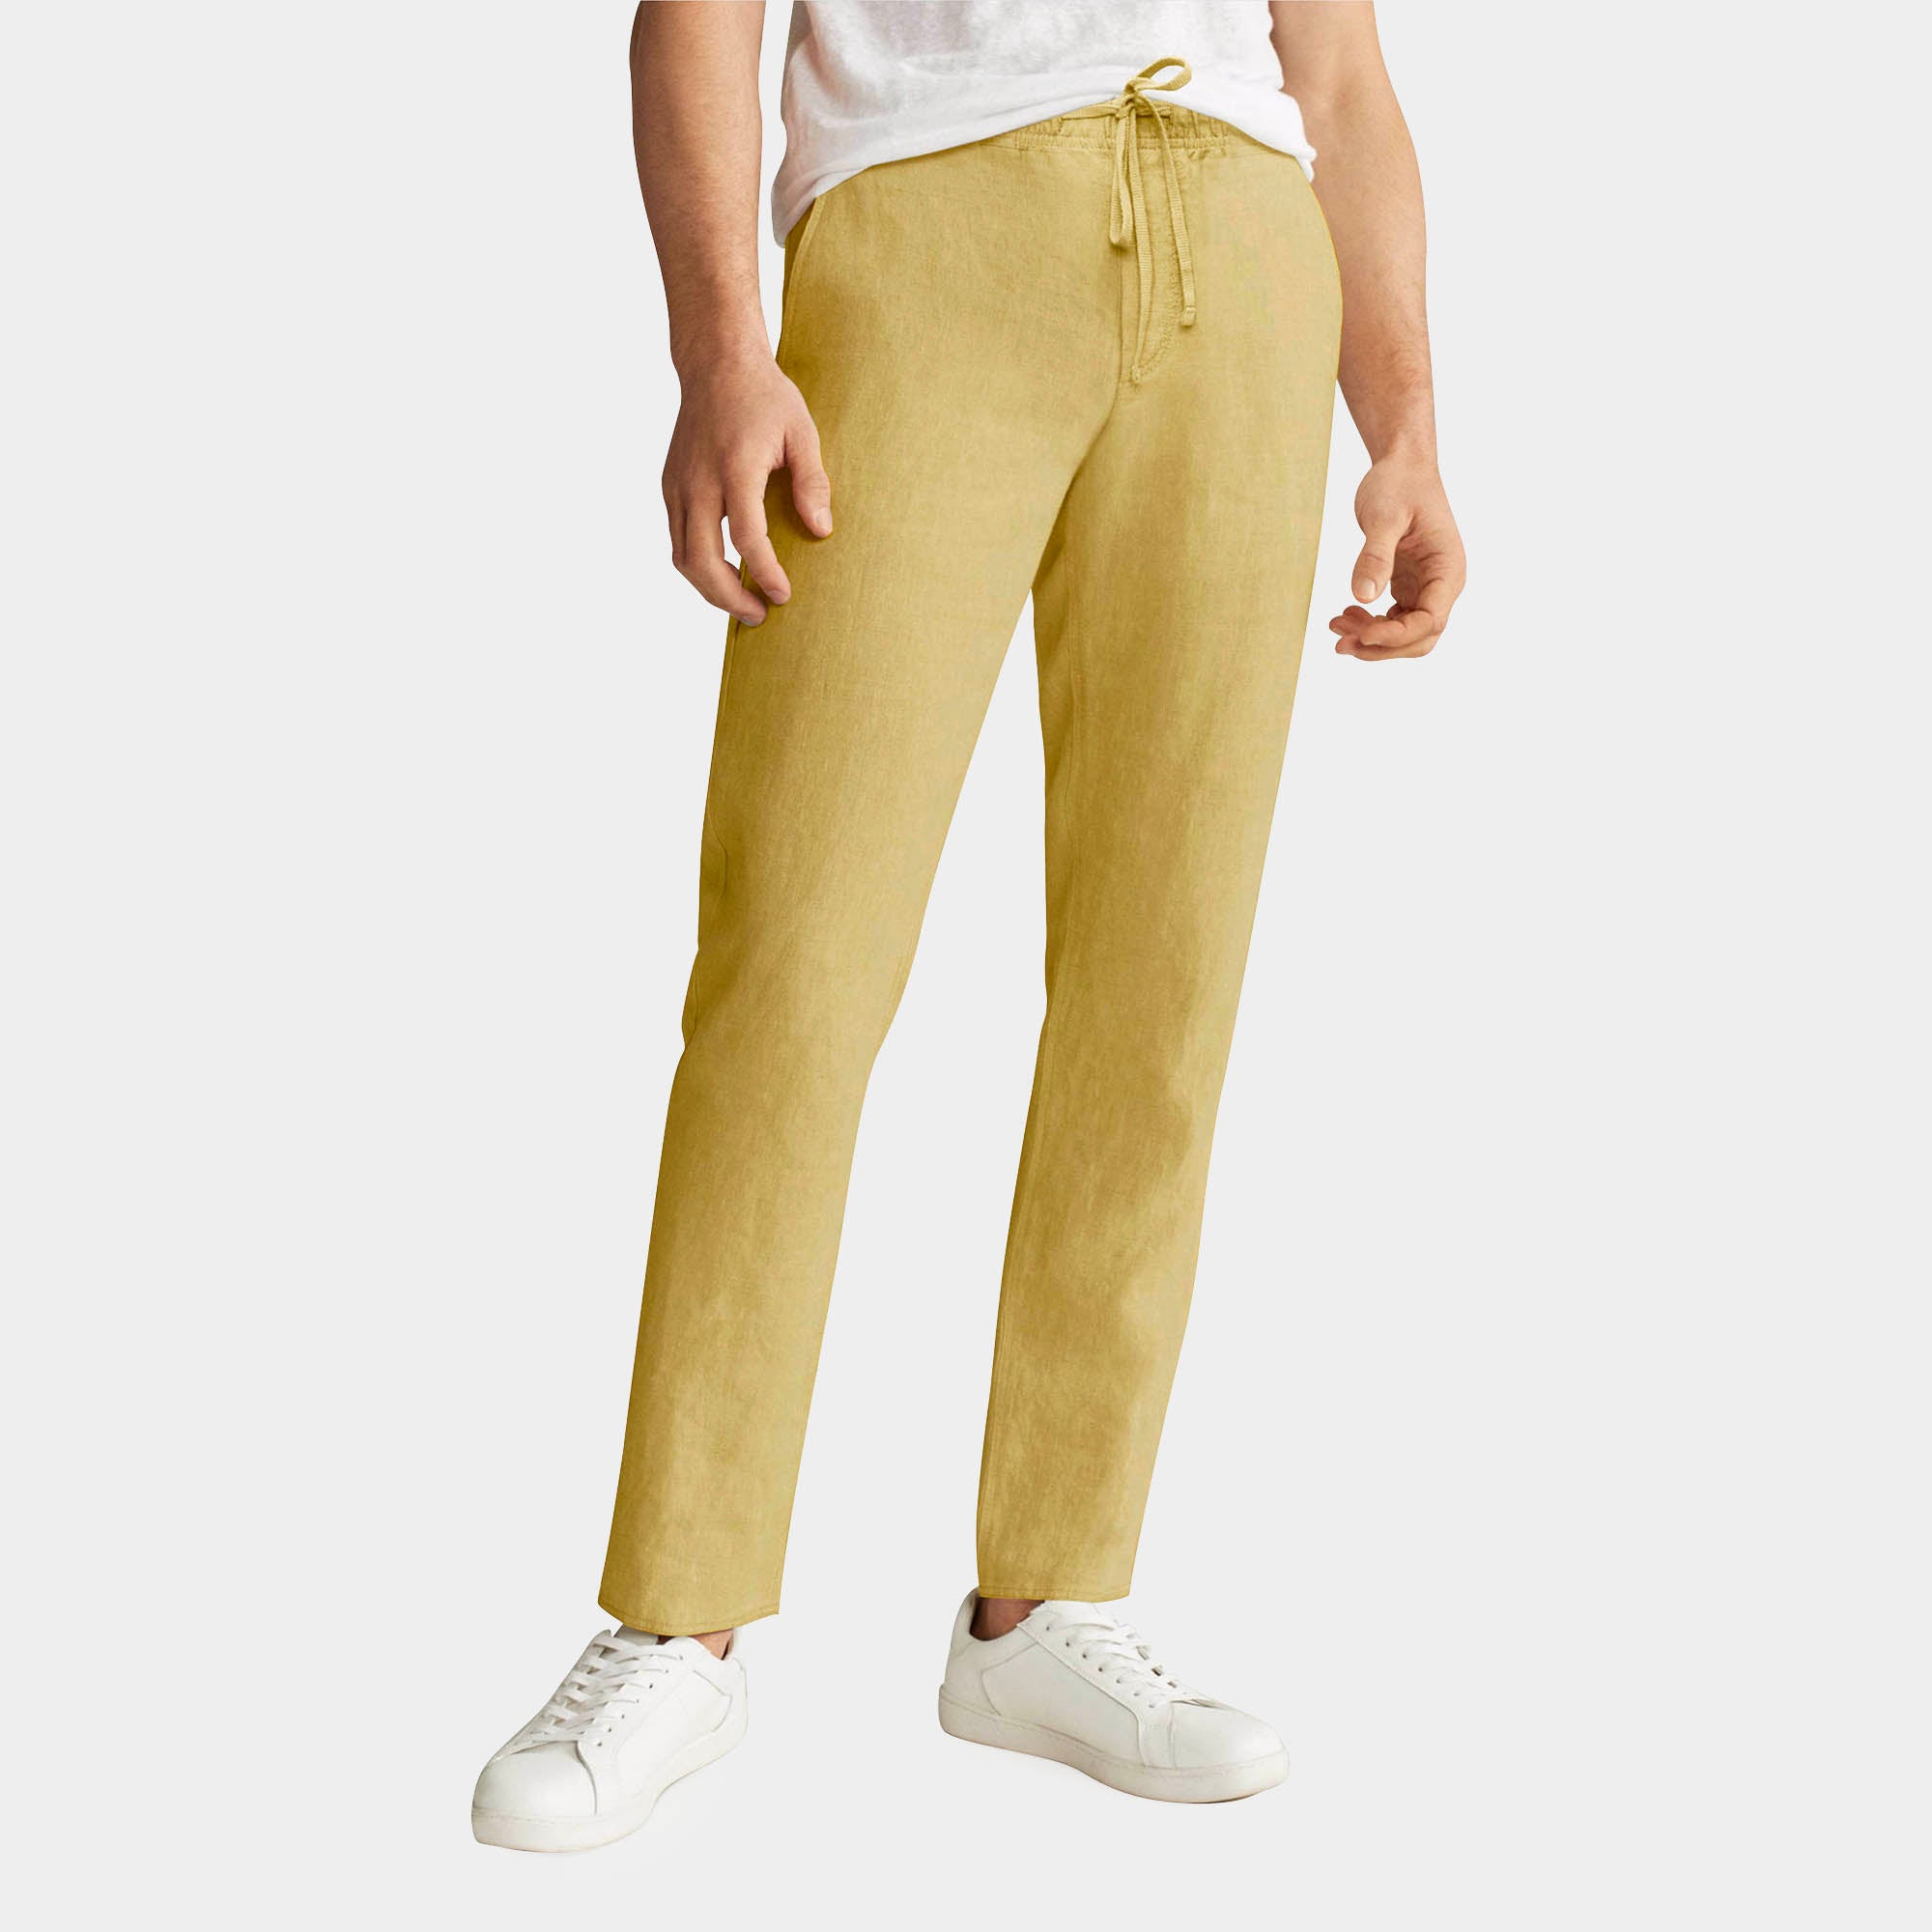 mens linen pants_linen_trousers_work at home_remote_formal business_casual_missy_old navy_wide leg_plus size_petite_linen_blend pants_cotton_macys_zara_oceanside_beach_pants_roxy_romper_drawstring_summer_coverup_tote_resort pants_relax_organic_cotton_hawaii_clearance_Khaki